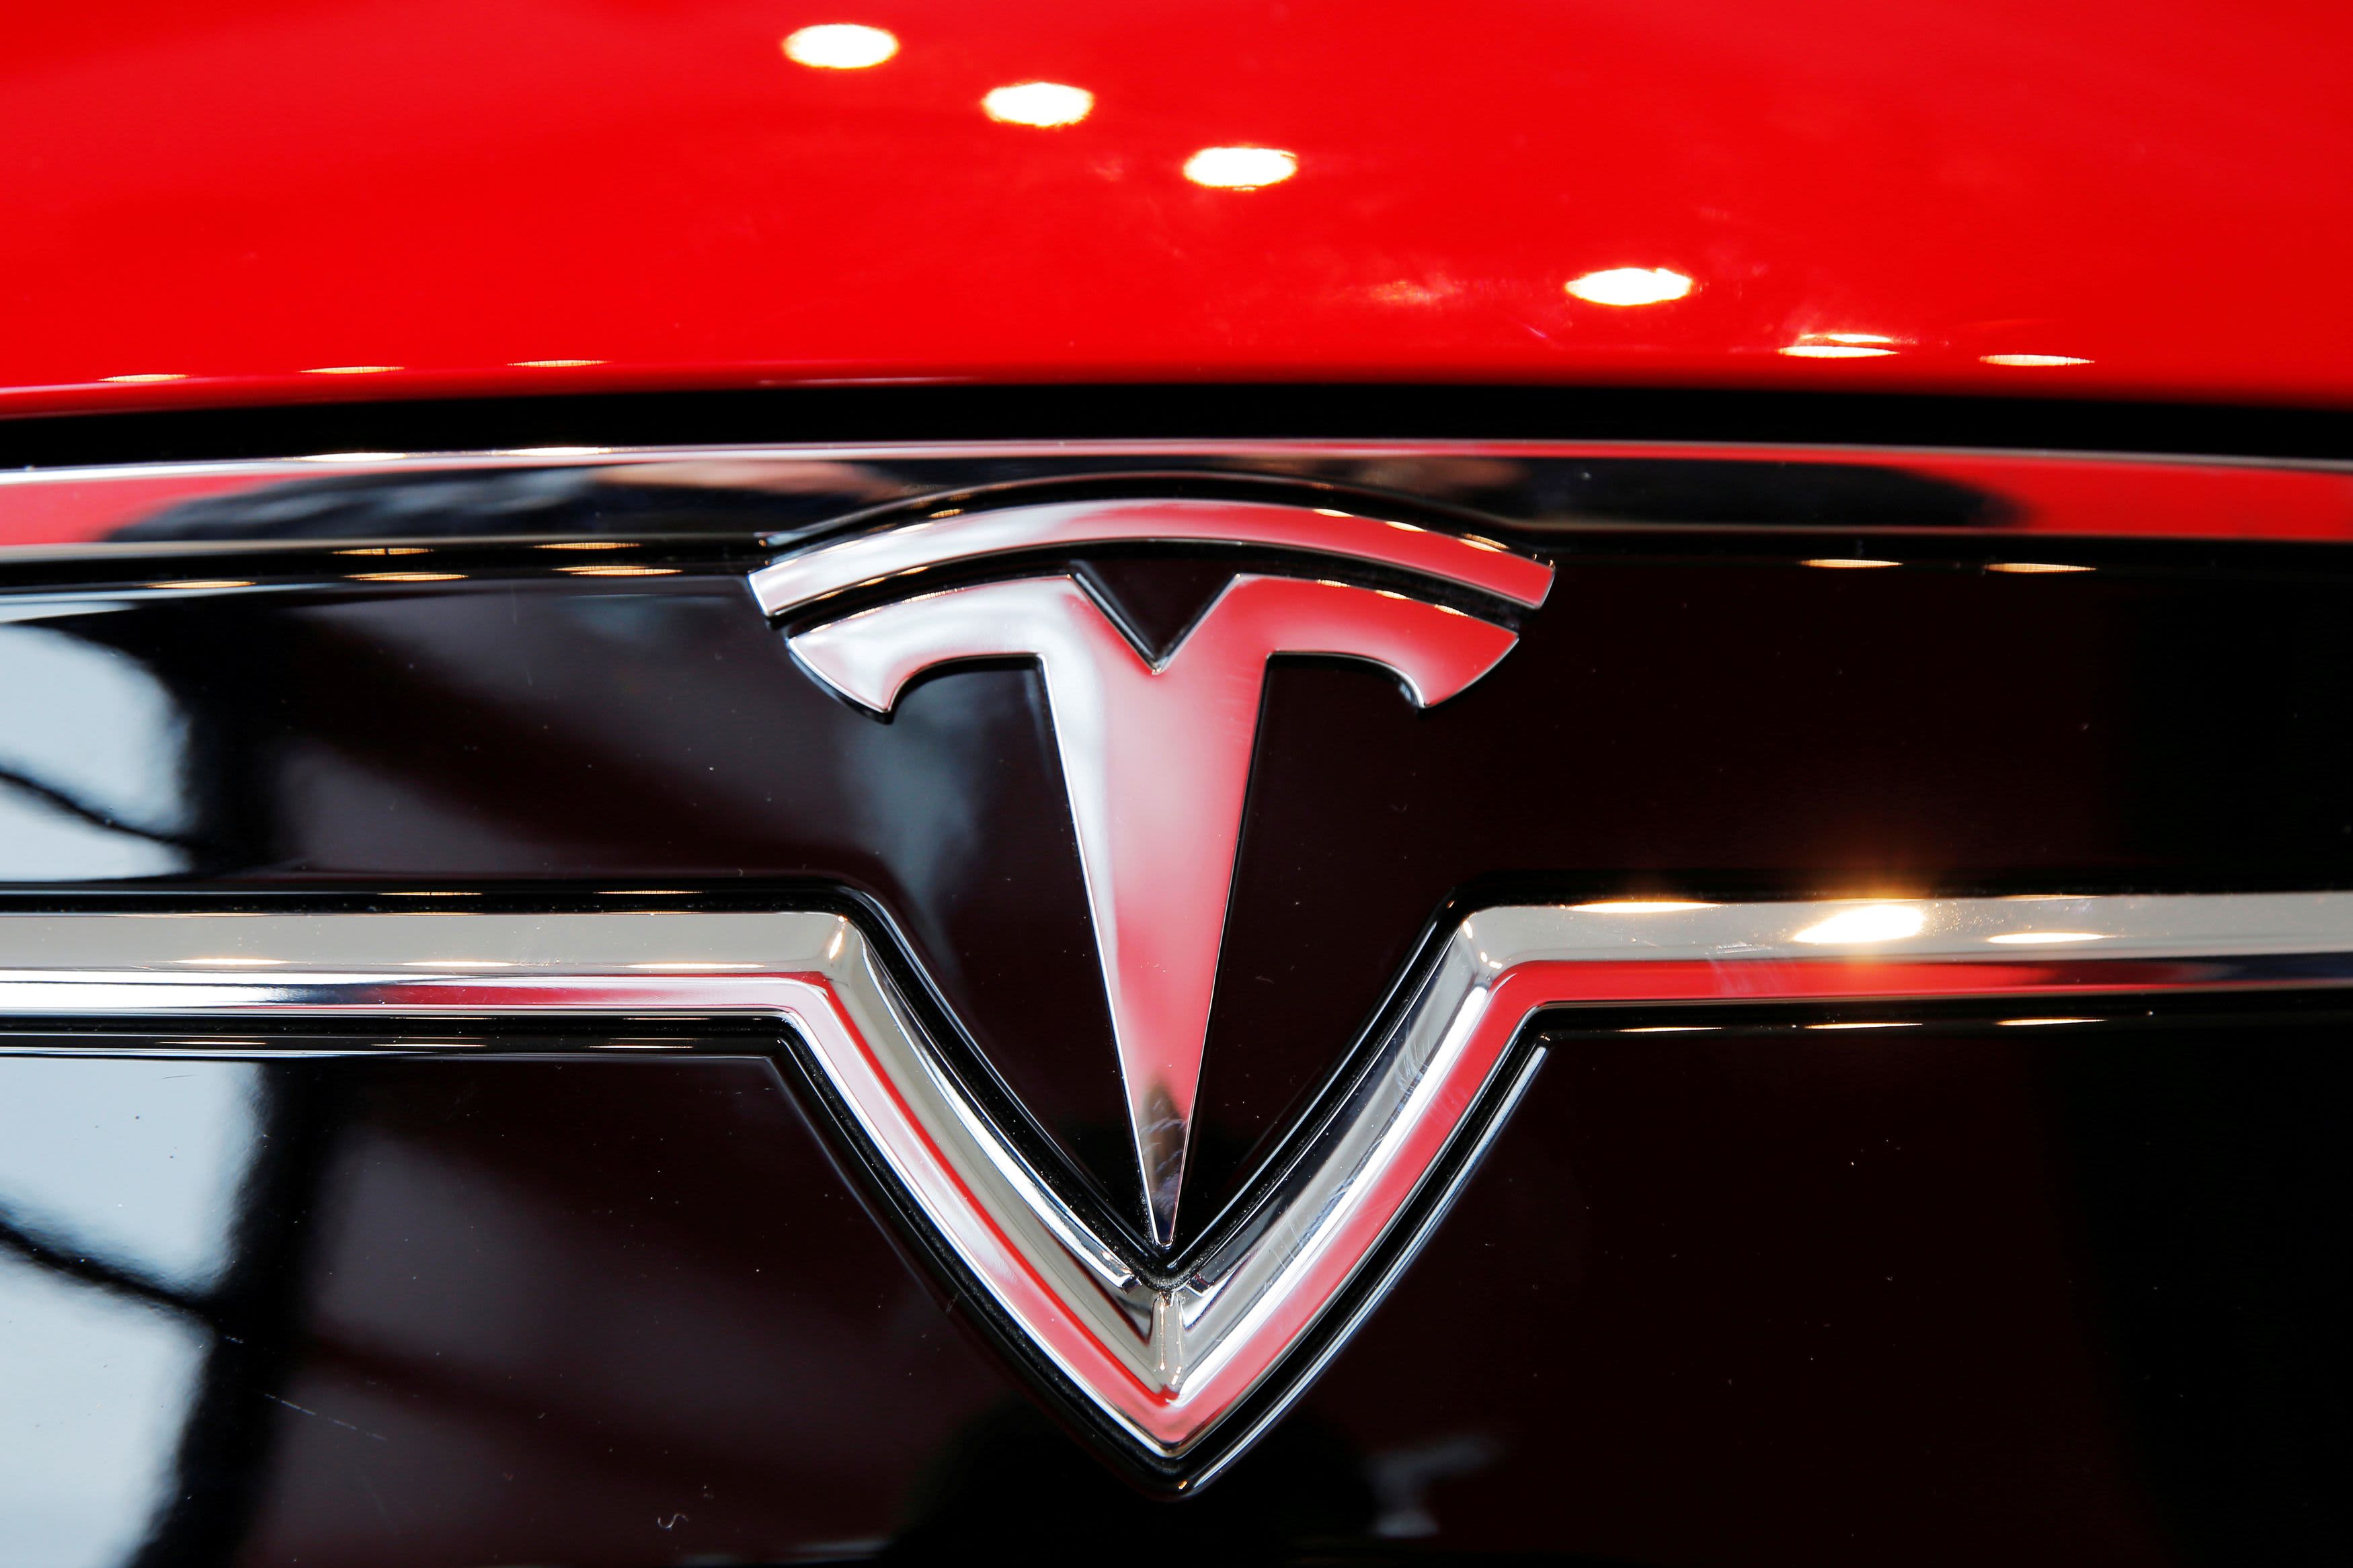 Elon Musk says Tesla FSD beta can lull users into thinking their cars are driverless